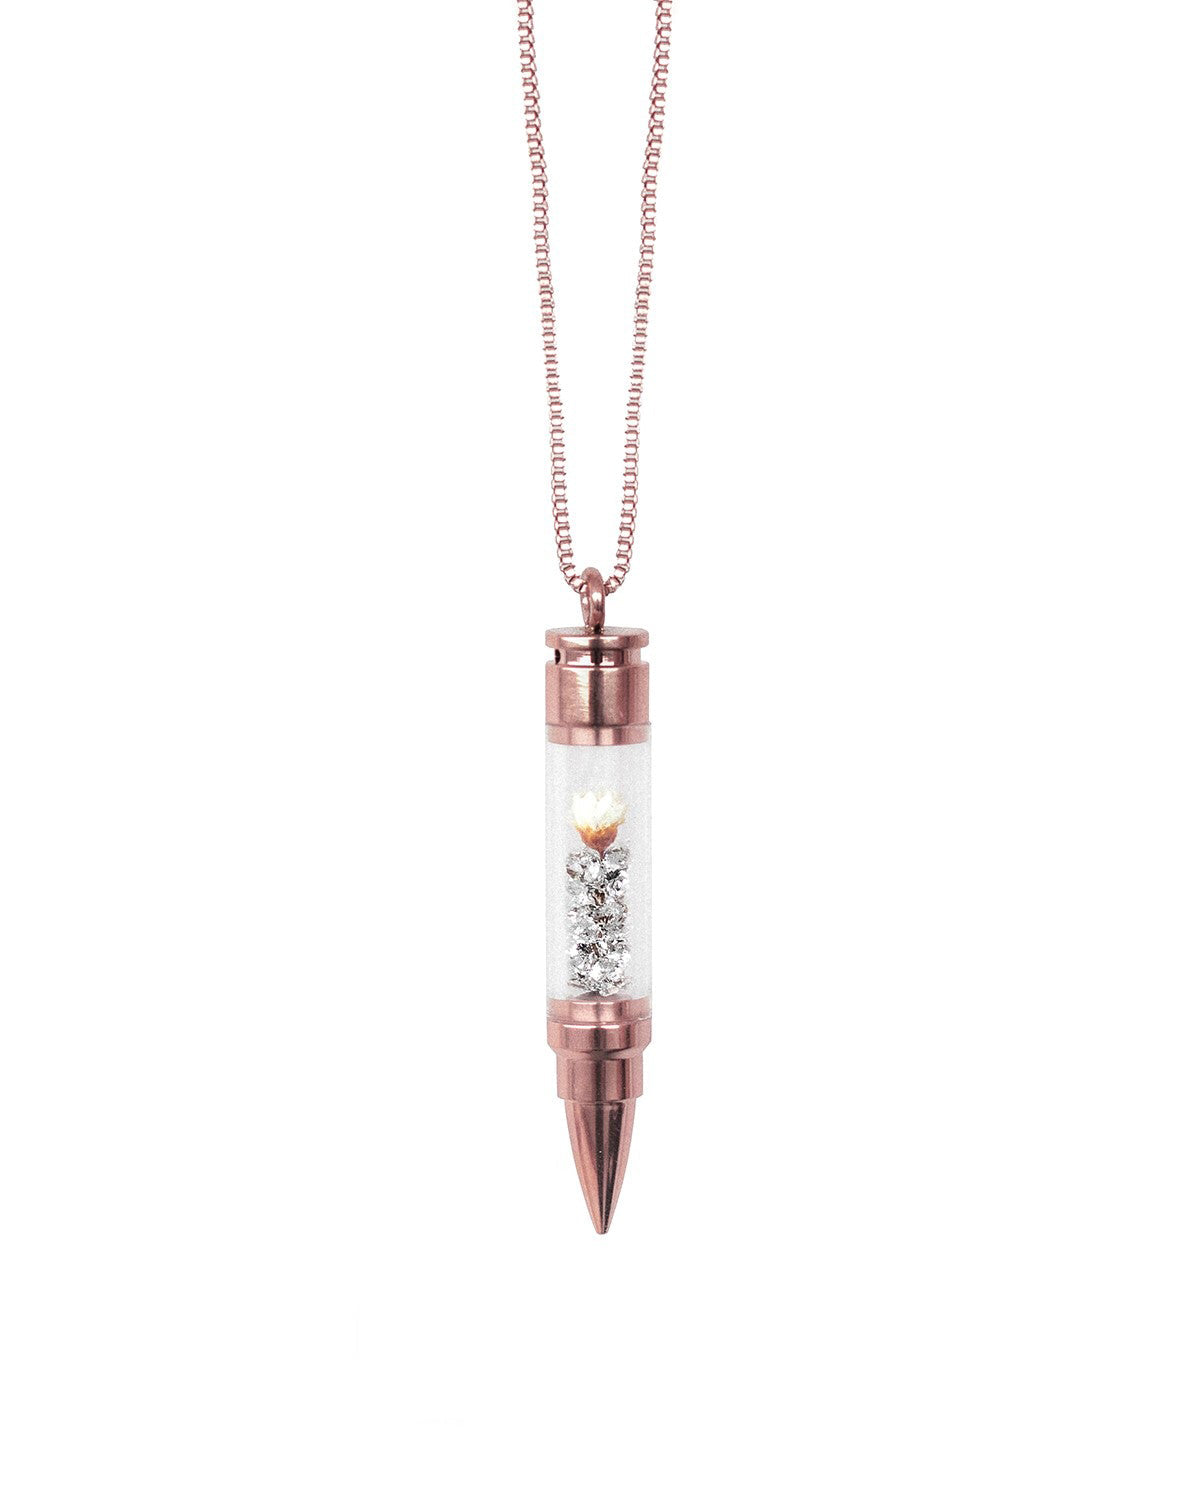 Eternity's Blossom Photo Necklace Rose Gold